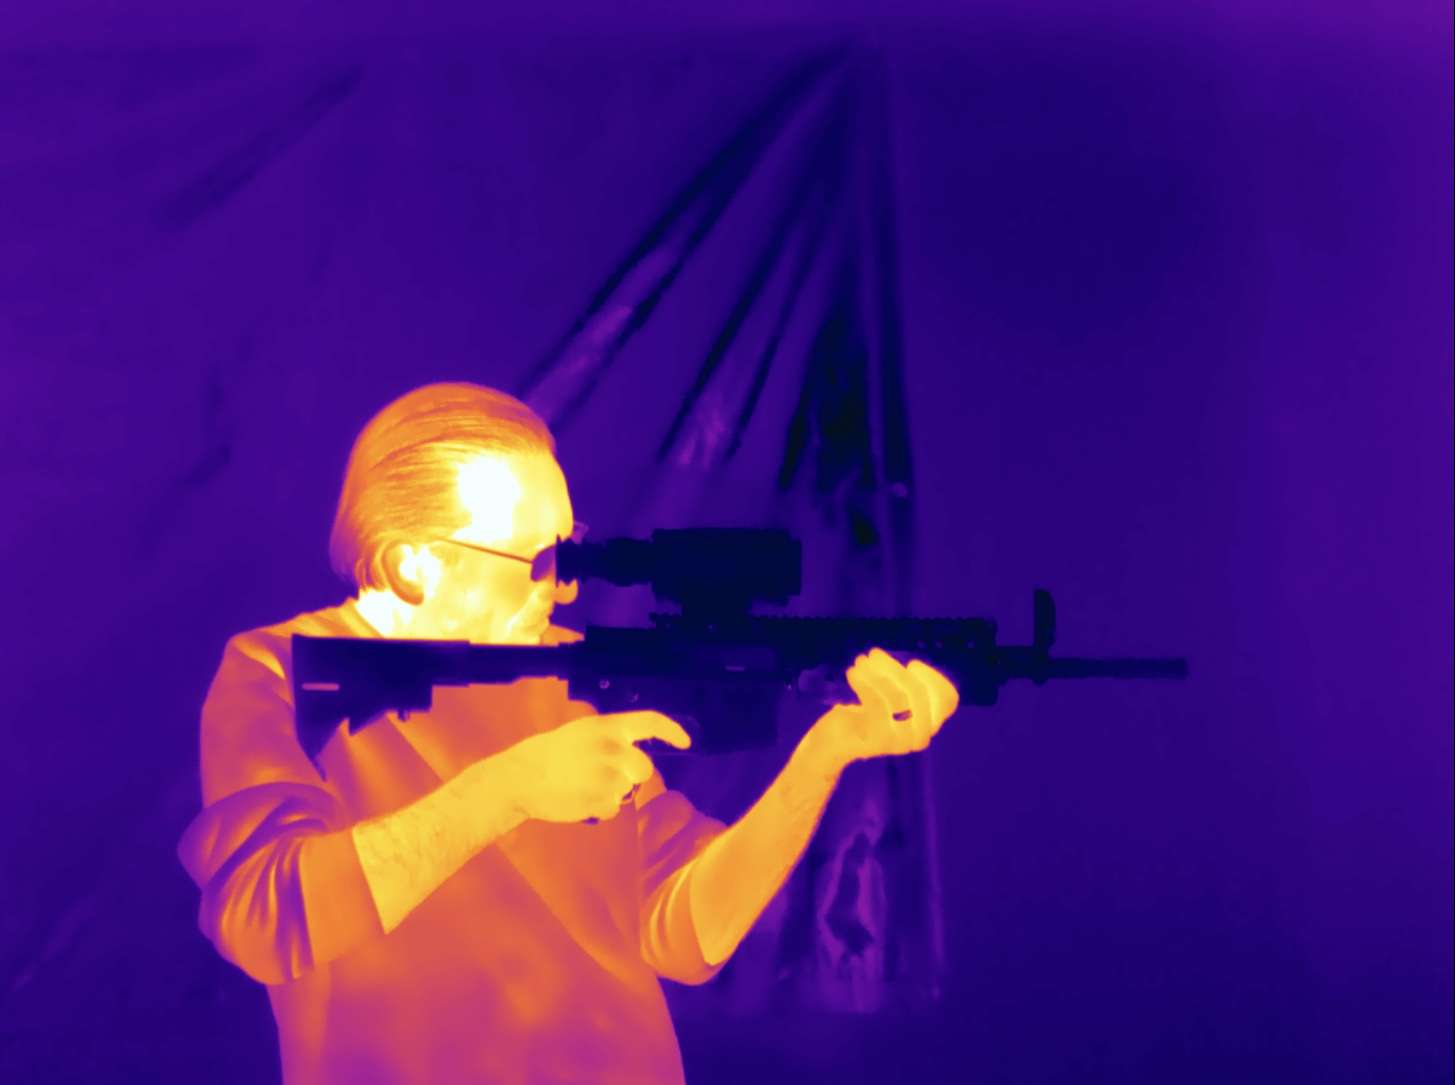 man looking through thermal scope while being looked at with thermal